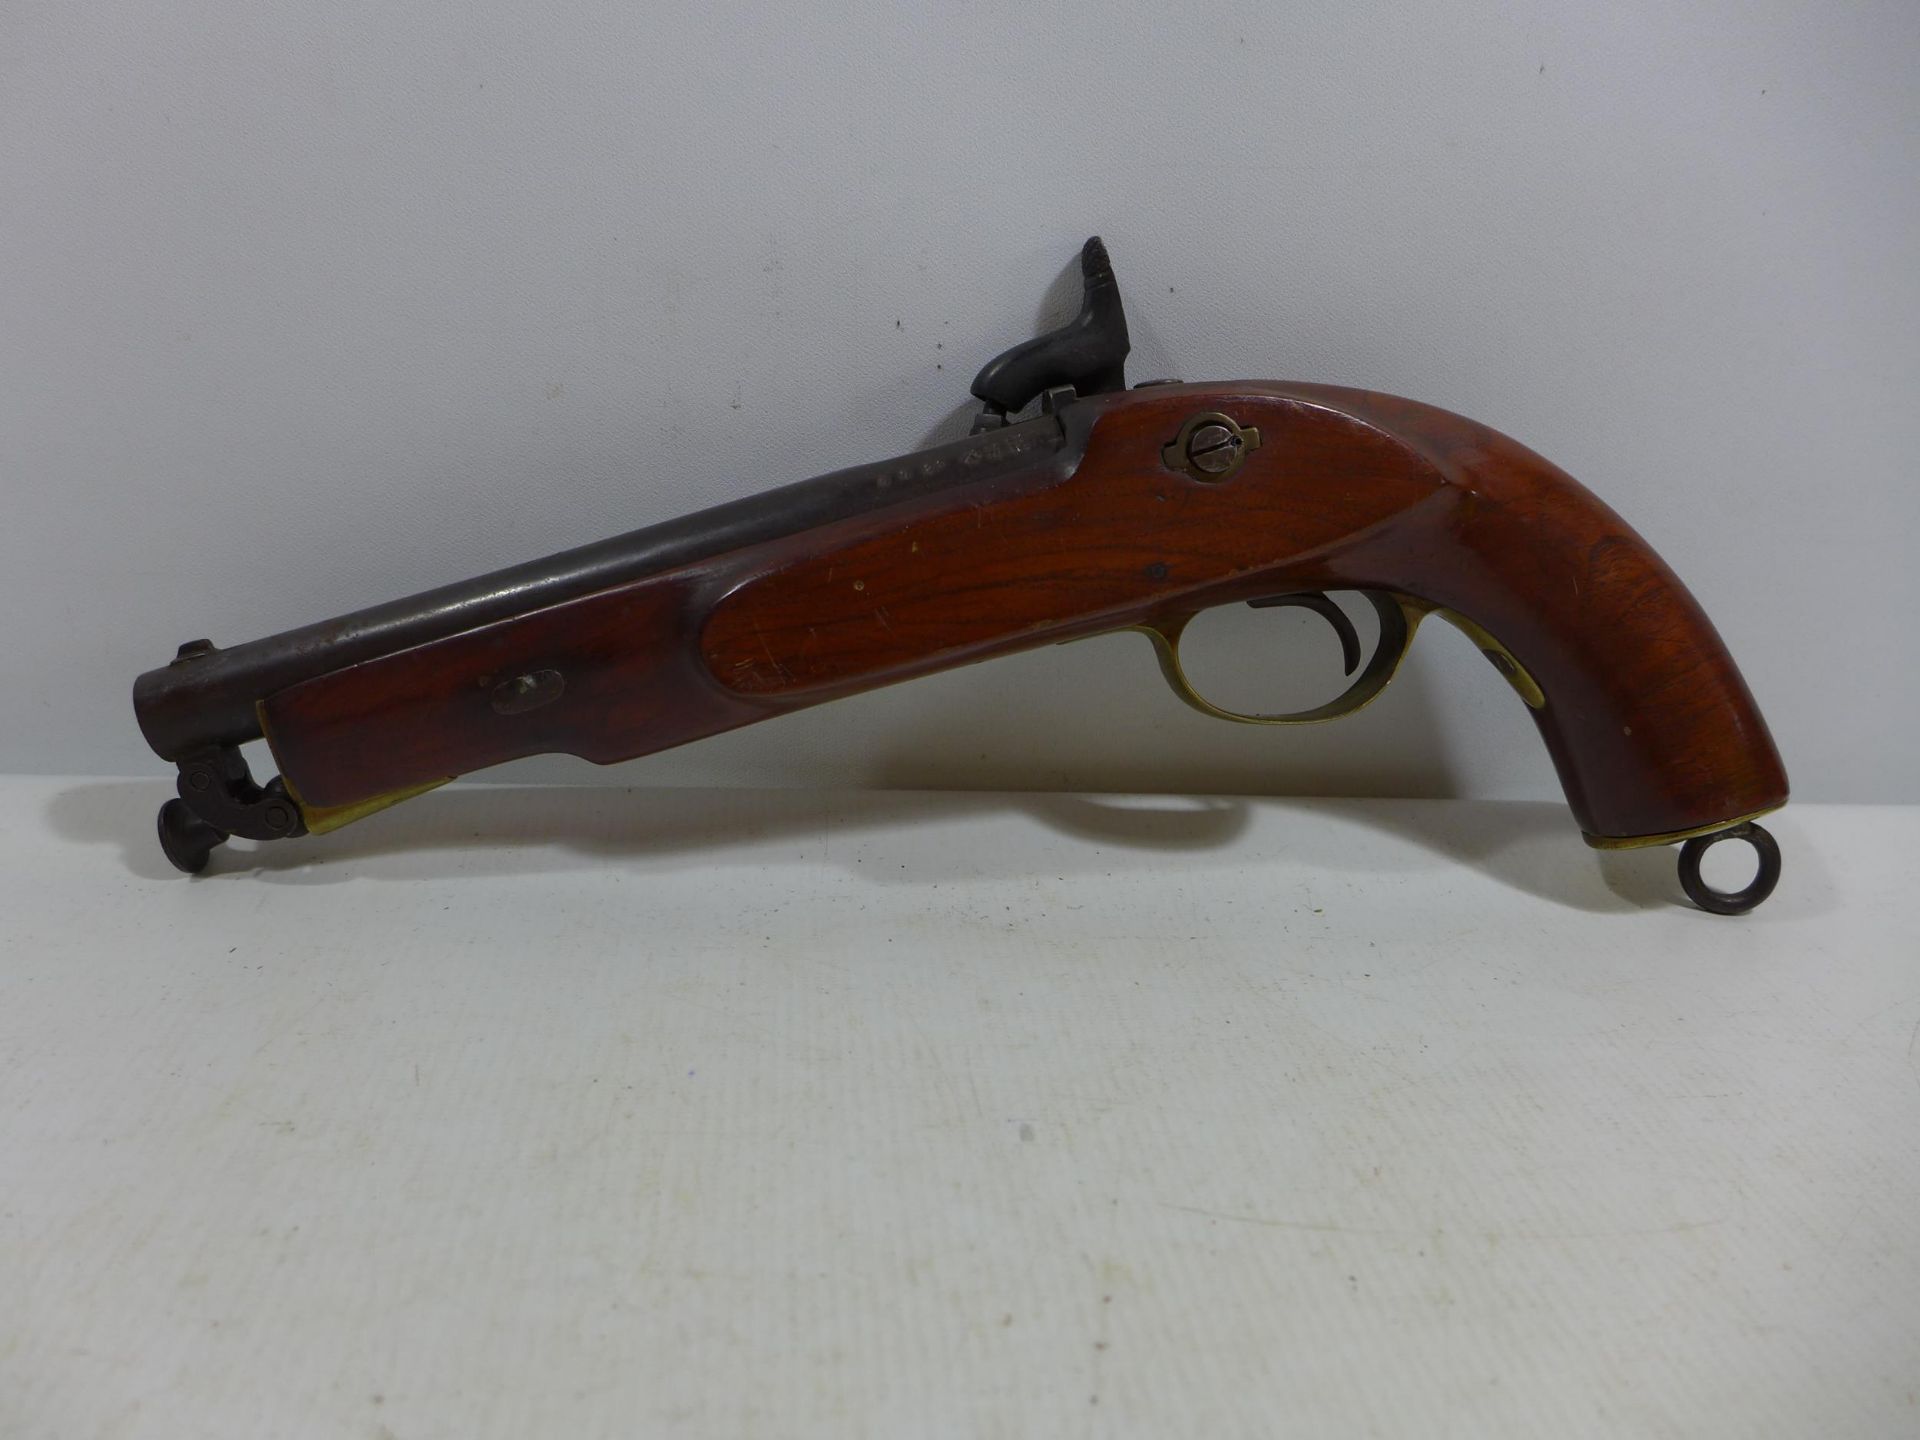 A DEACTIVATED PERCUSSION CAP PISTOL, 19.5CM BARREL, WOODEN STOCK WITH BRASS FITTINGS, LENGTH 36CM - Image 2 of 6